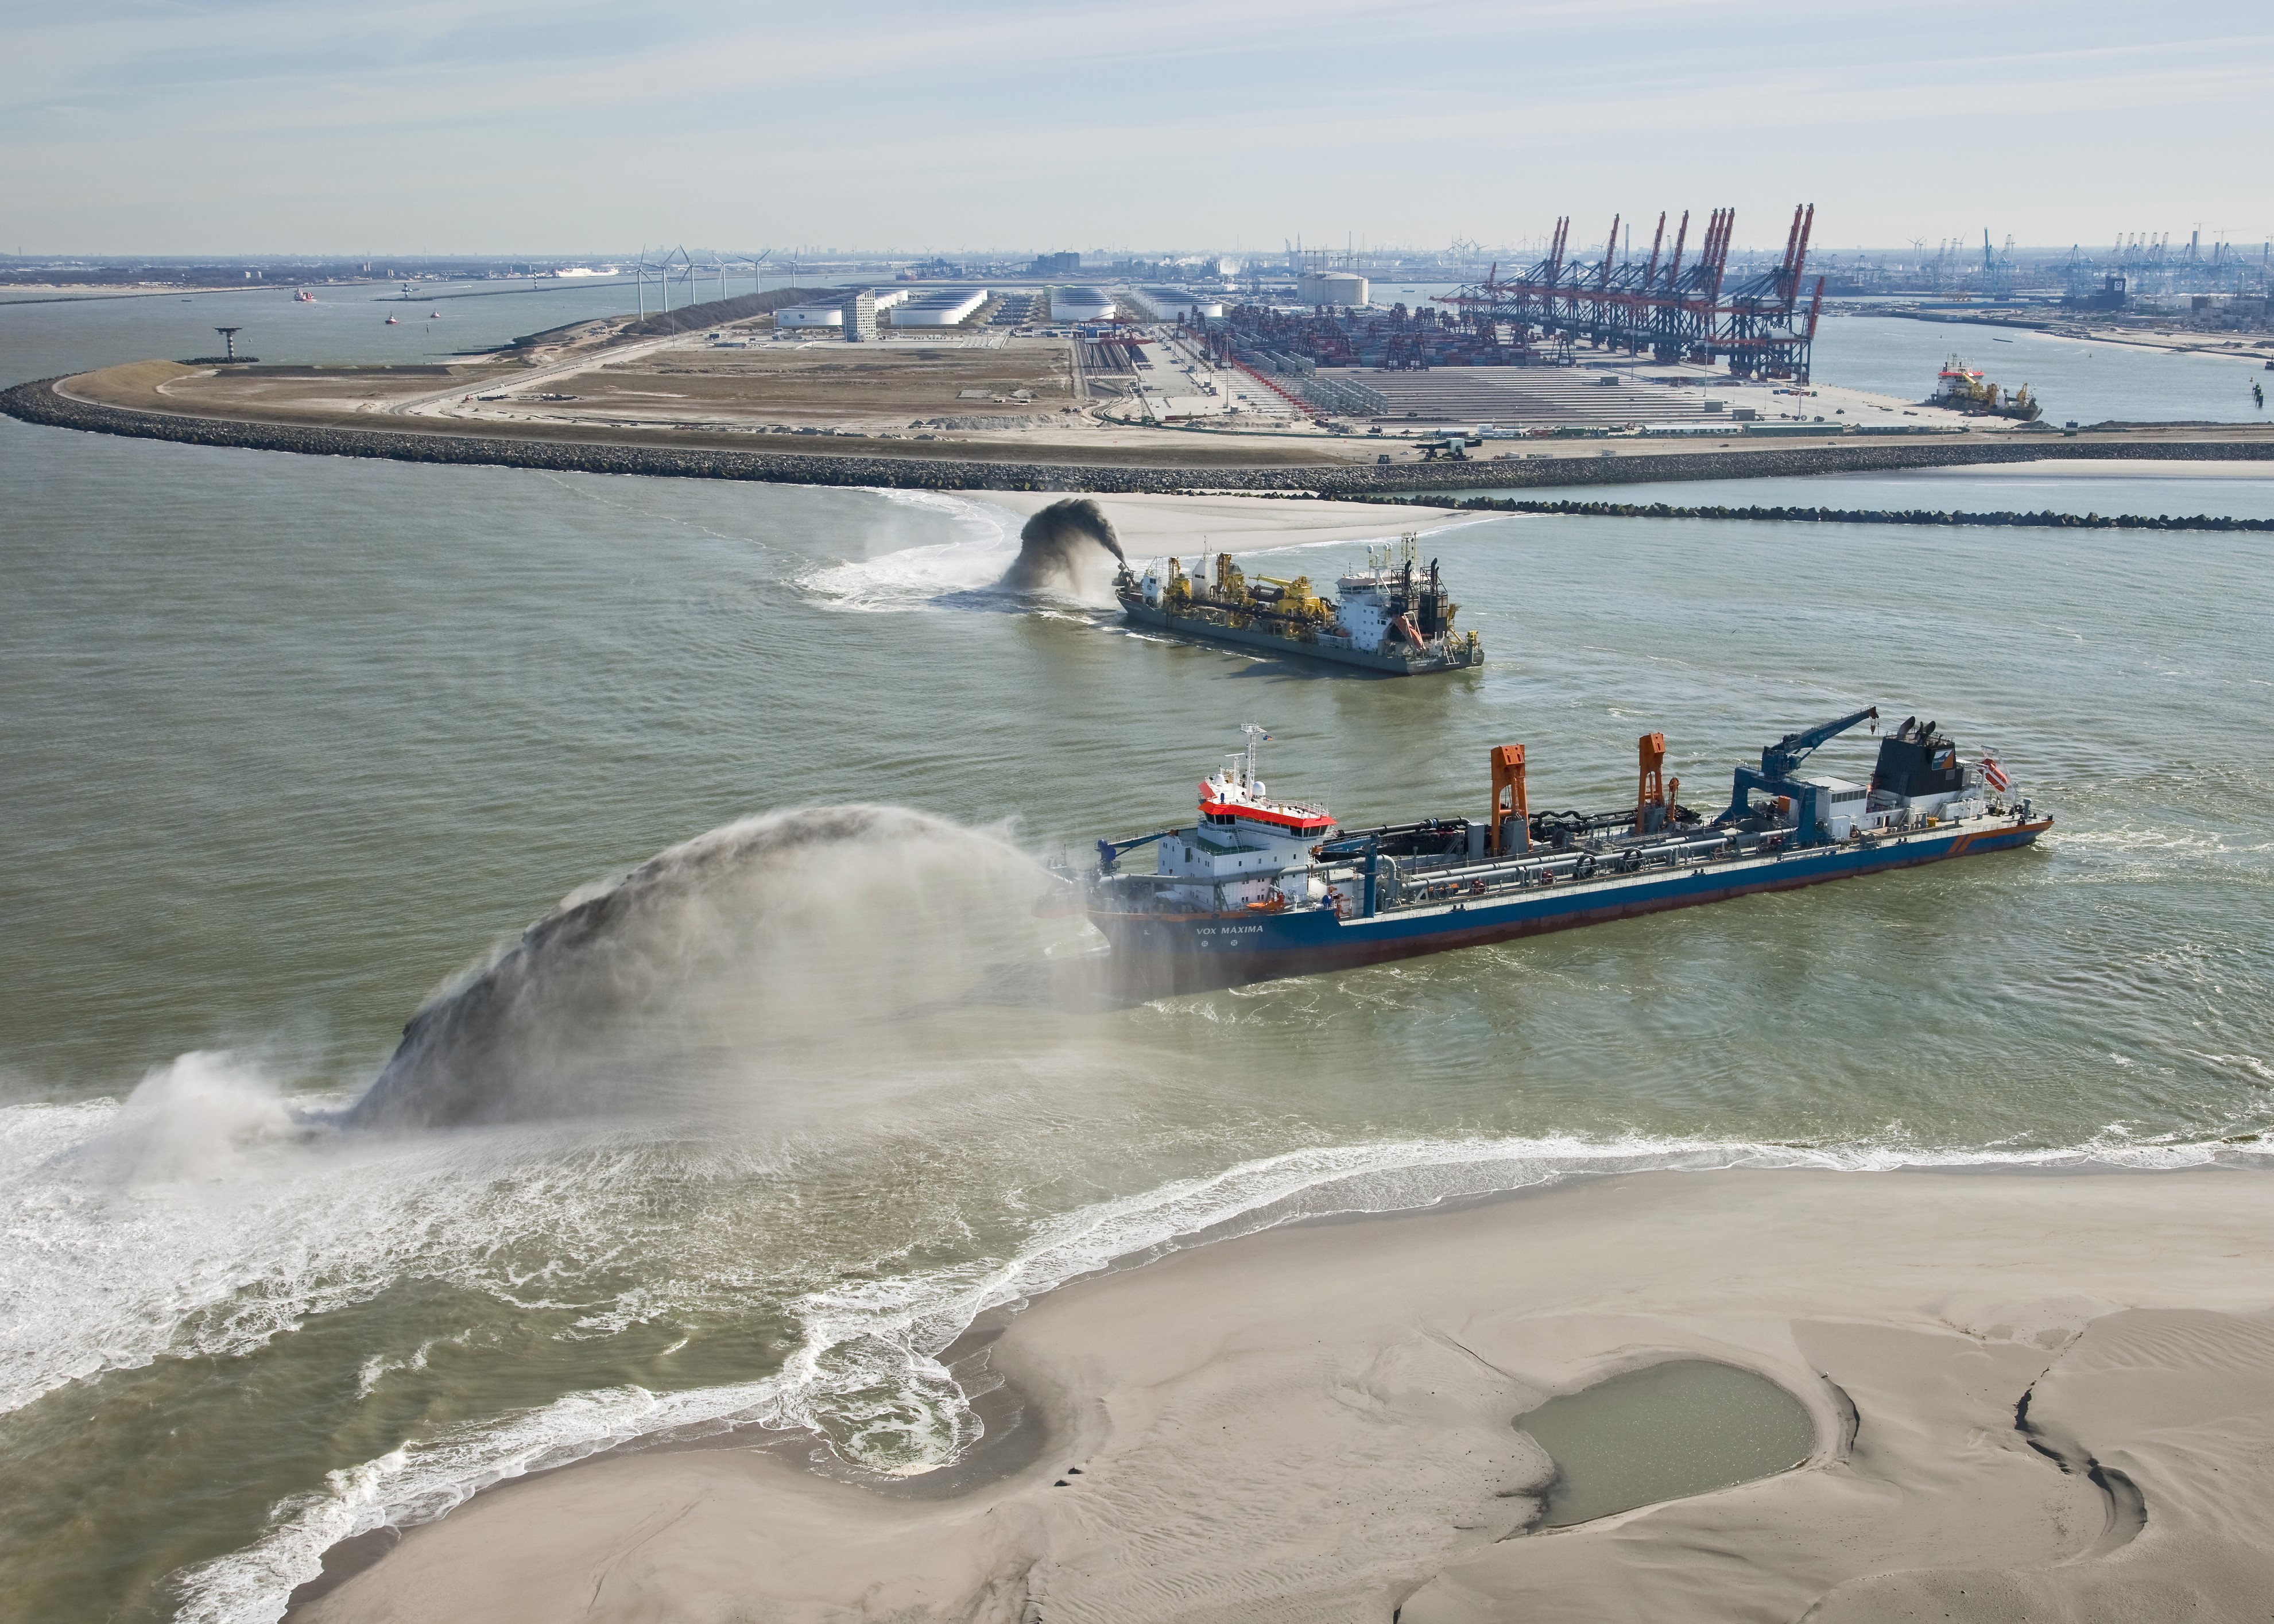 Construction of the Maasvlakte 2 in Rotterdam by two trailing suction hopper dredgers